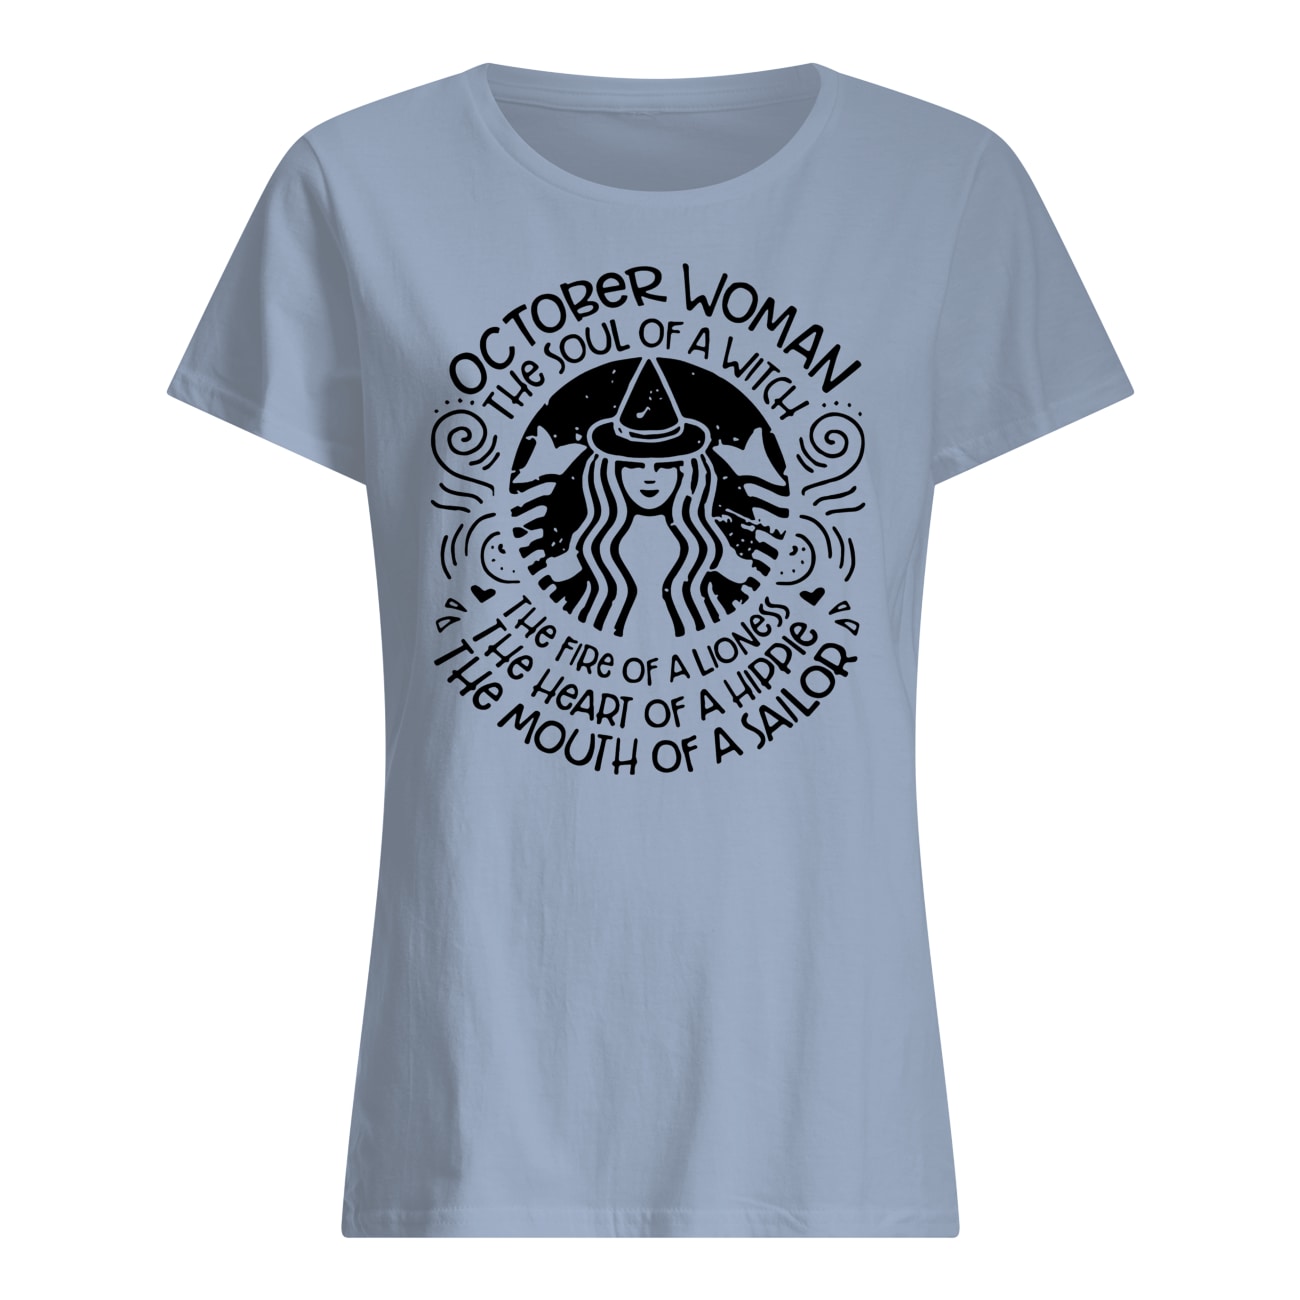 Mermaid october woman the soul of a witch the fire of a lioness womens shirt